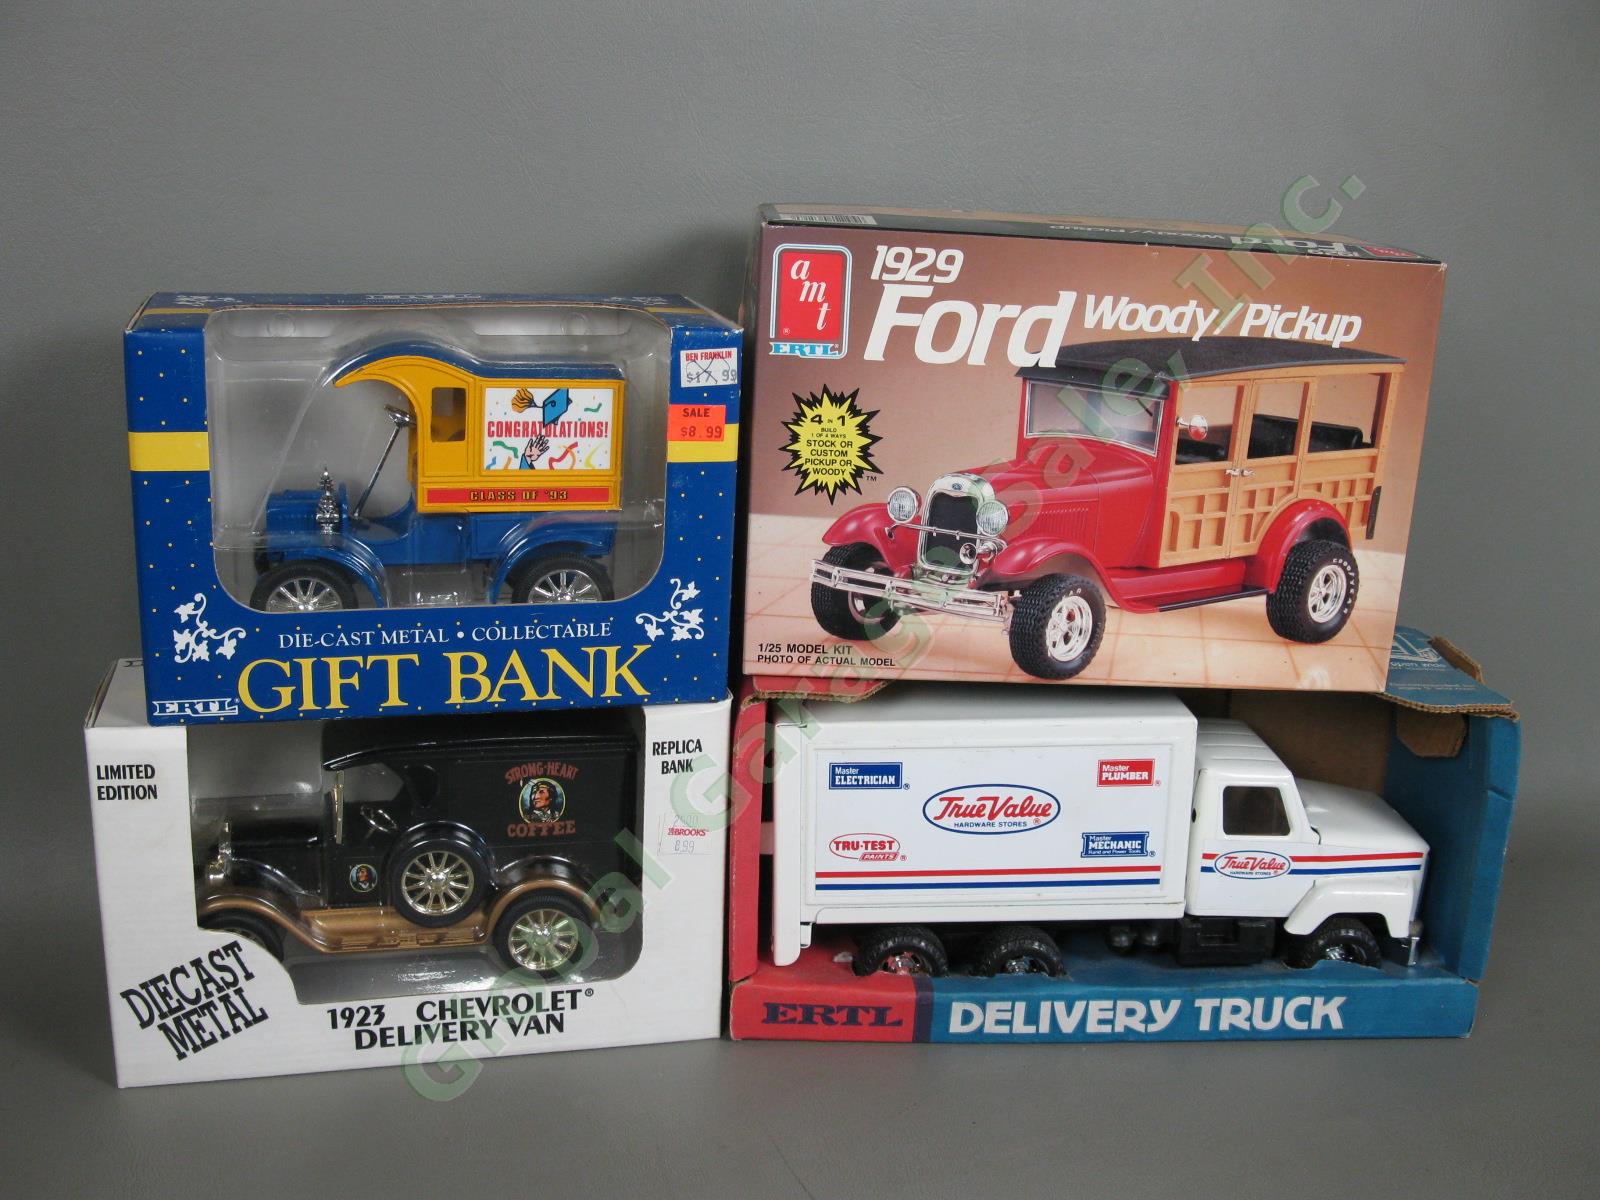 4 Ertl Car Coin Bank Lot Delivery Truck Ford Pickup True Value 1929 Woody Model